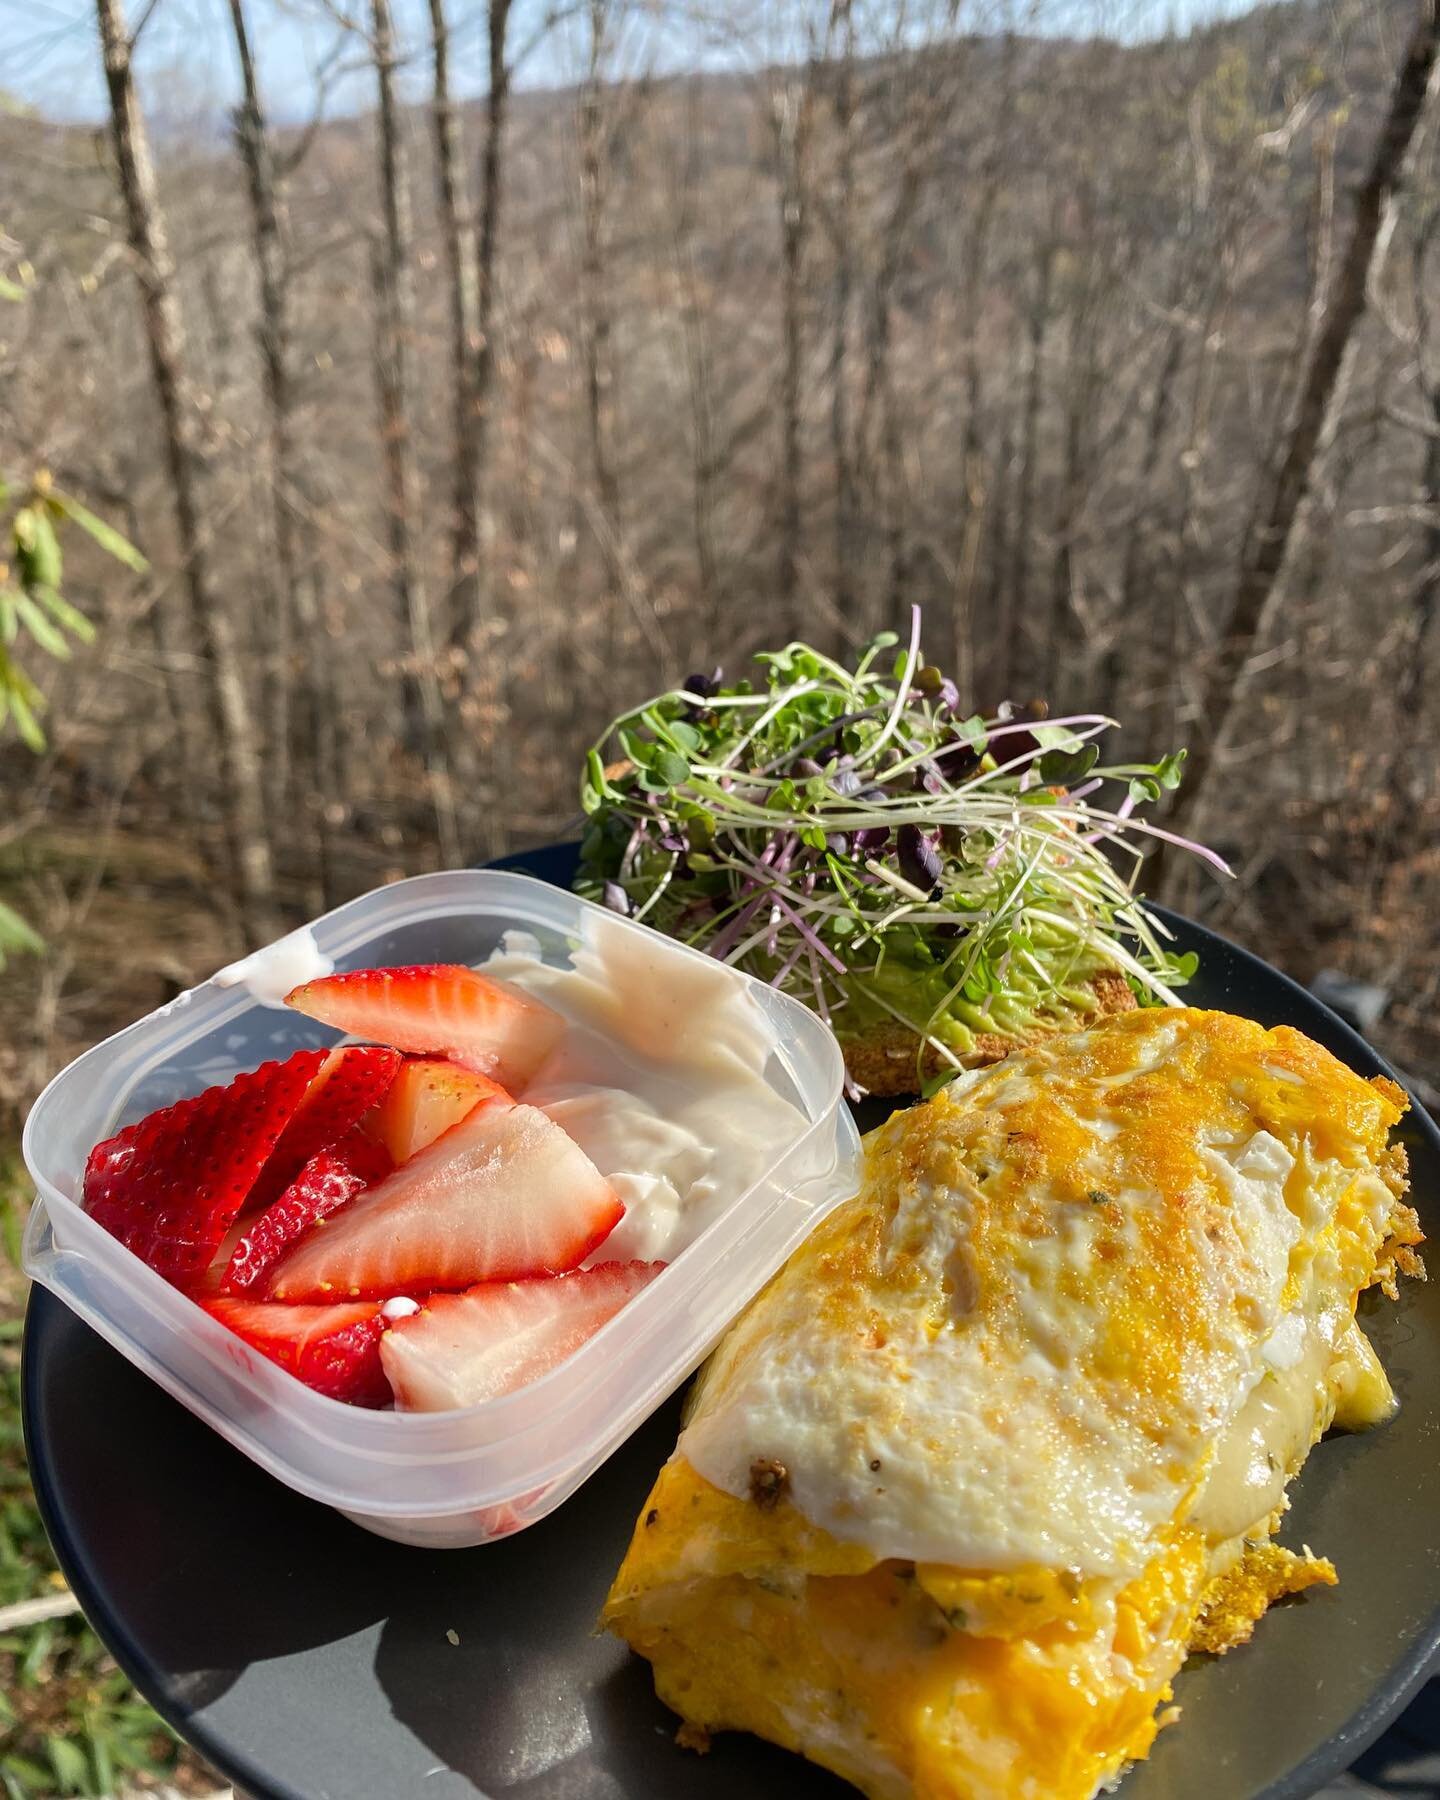 Eating healthy on vacation does not need to be difficult! Easy breakfast that can be whipped up in 10 minutes &darr;&darr;&darr; 

Avo on Ezekiel toast loaded with microgreens, organic eggs, local cheese (local to beech mountain!), yogurt and strawbe